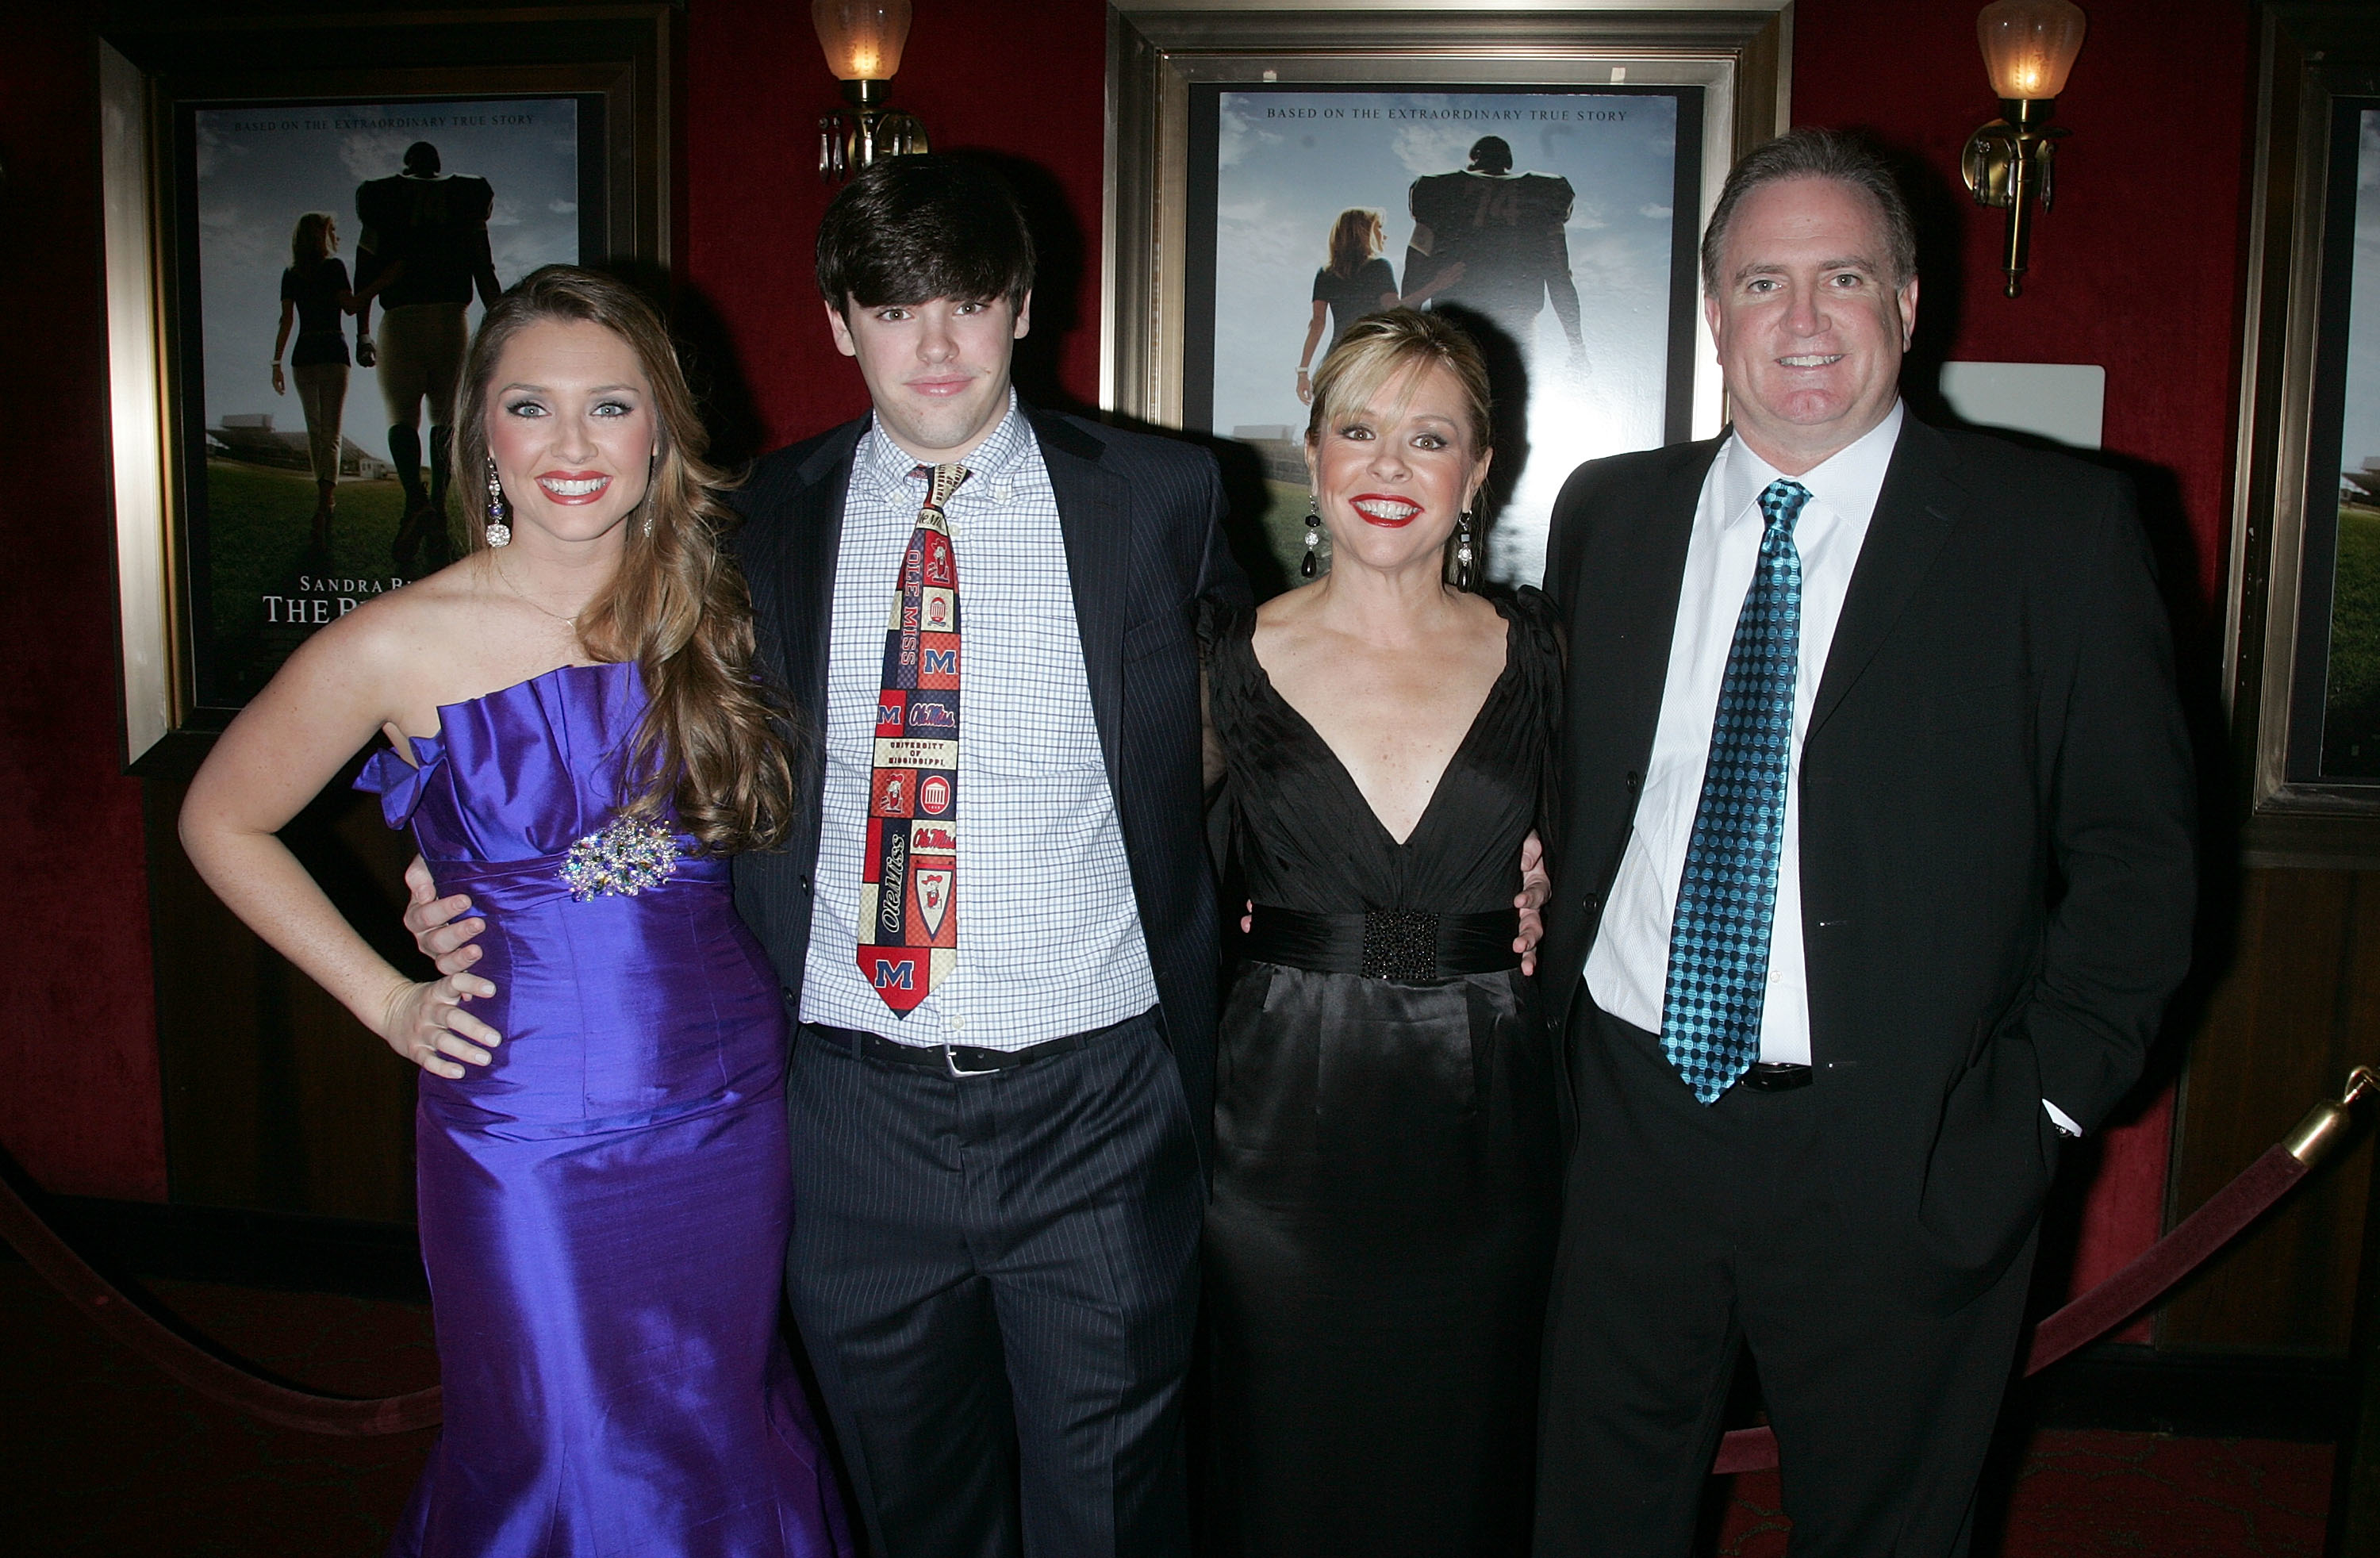 The Tuohy family minus Michael Oher